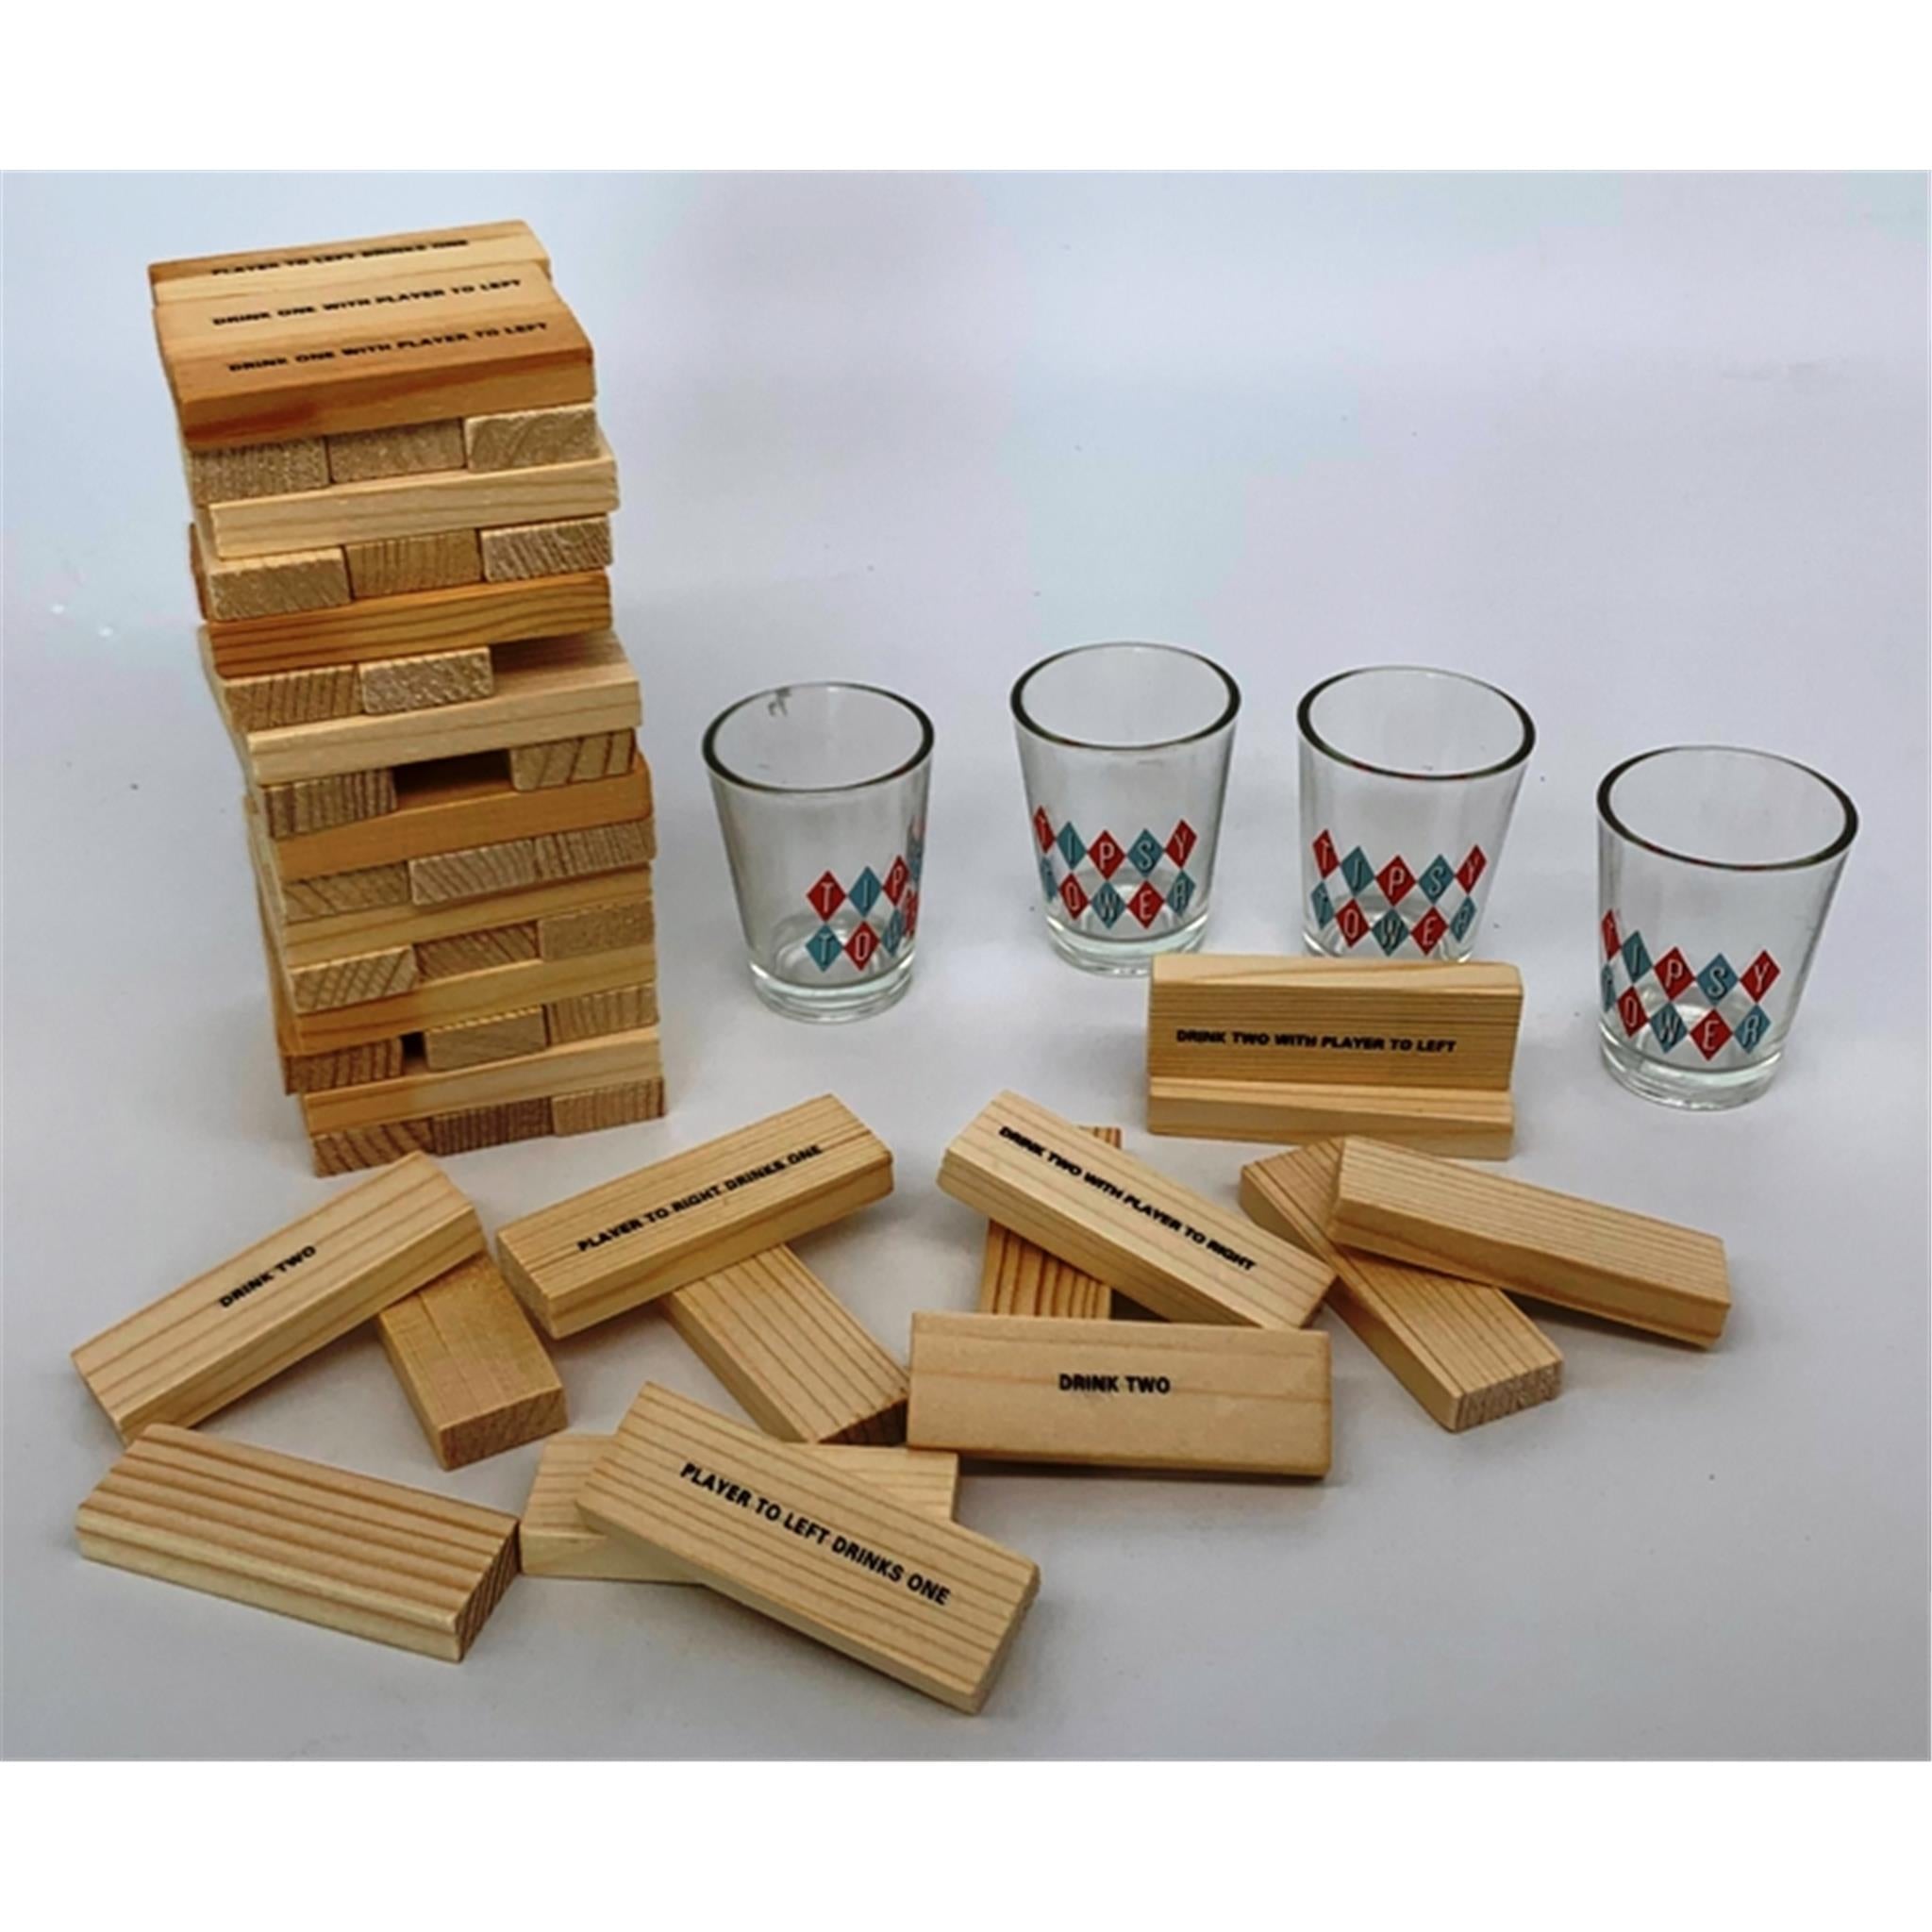 Tipsy Tower with playing pieces product image